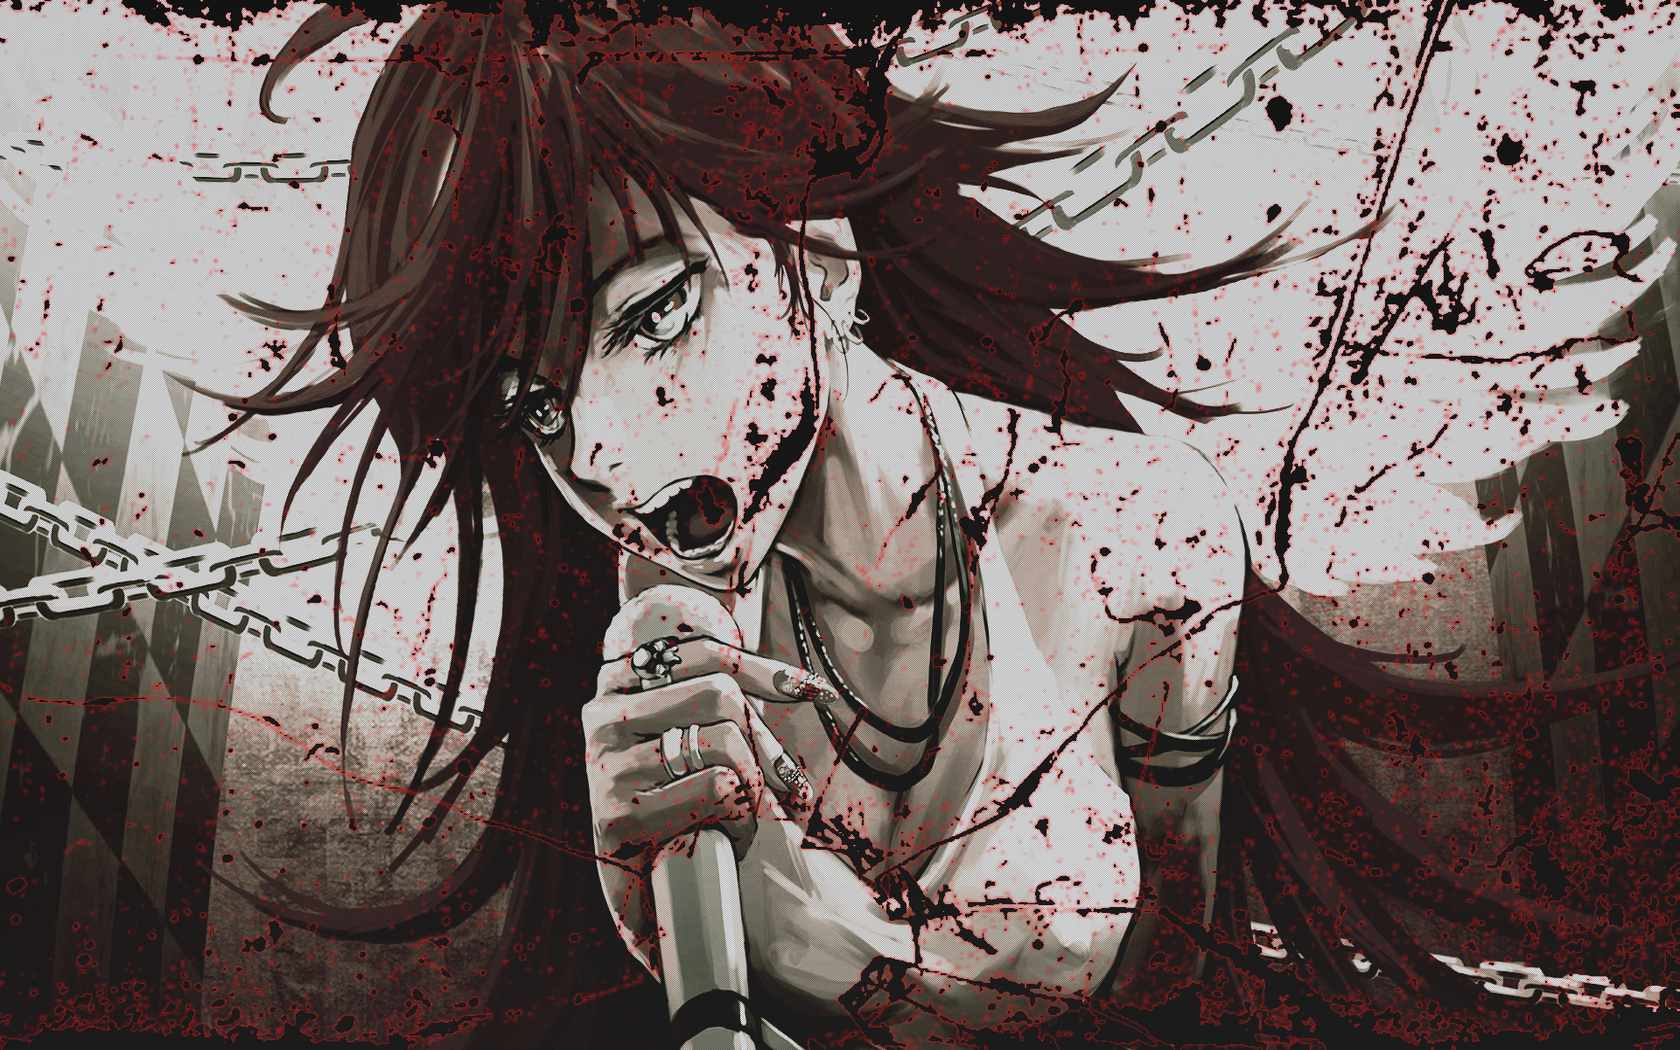 Anime 1680x1050 anime anime girls Panty and Stocking with Garterbelt blood open mouth microphone brunette blood spatter women long hair chains